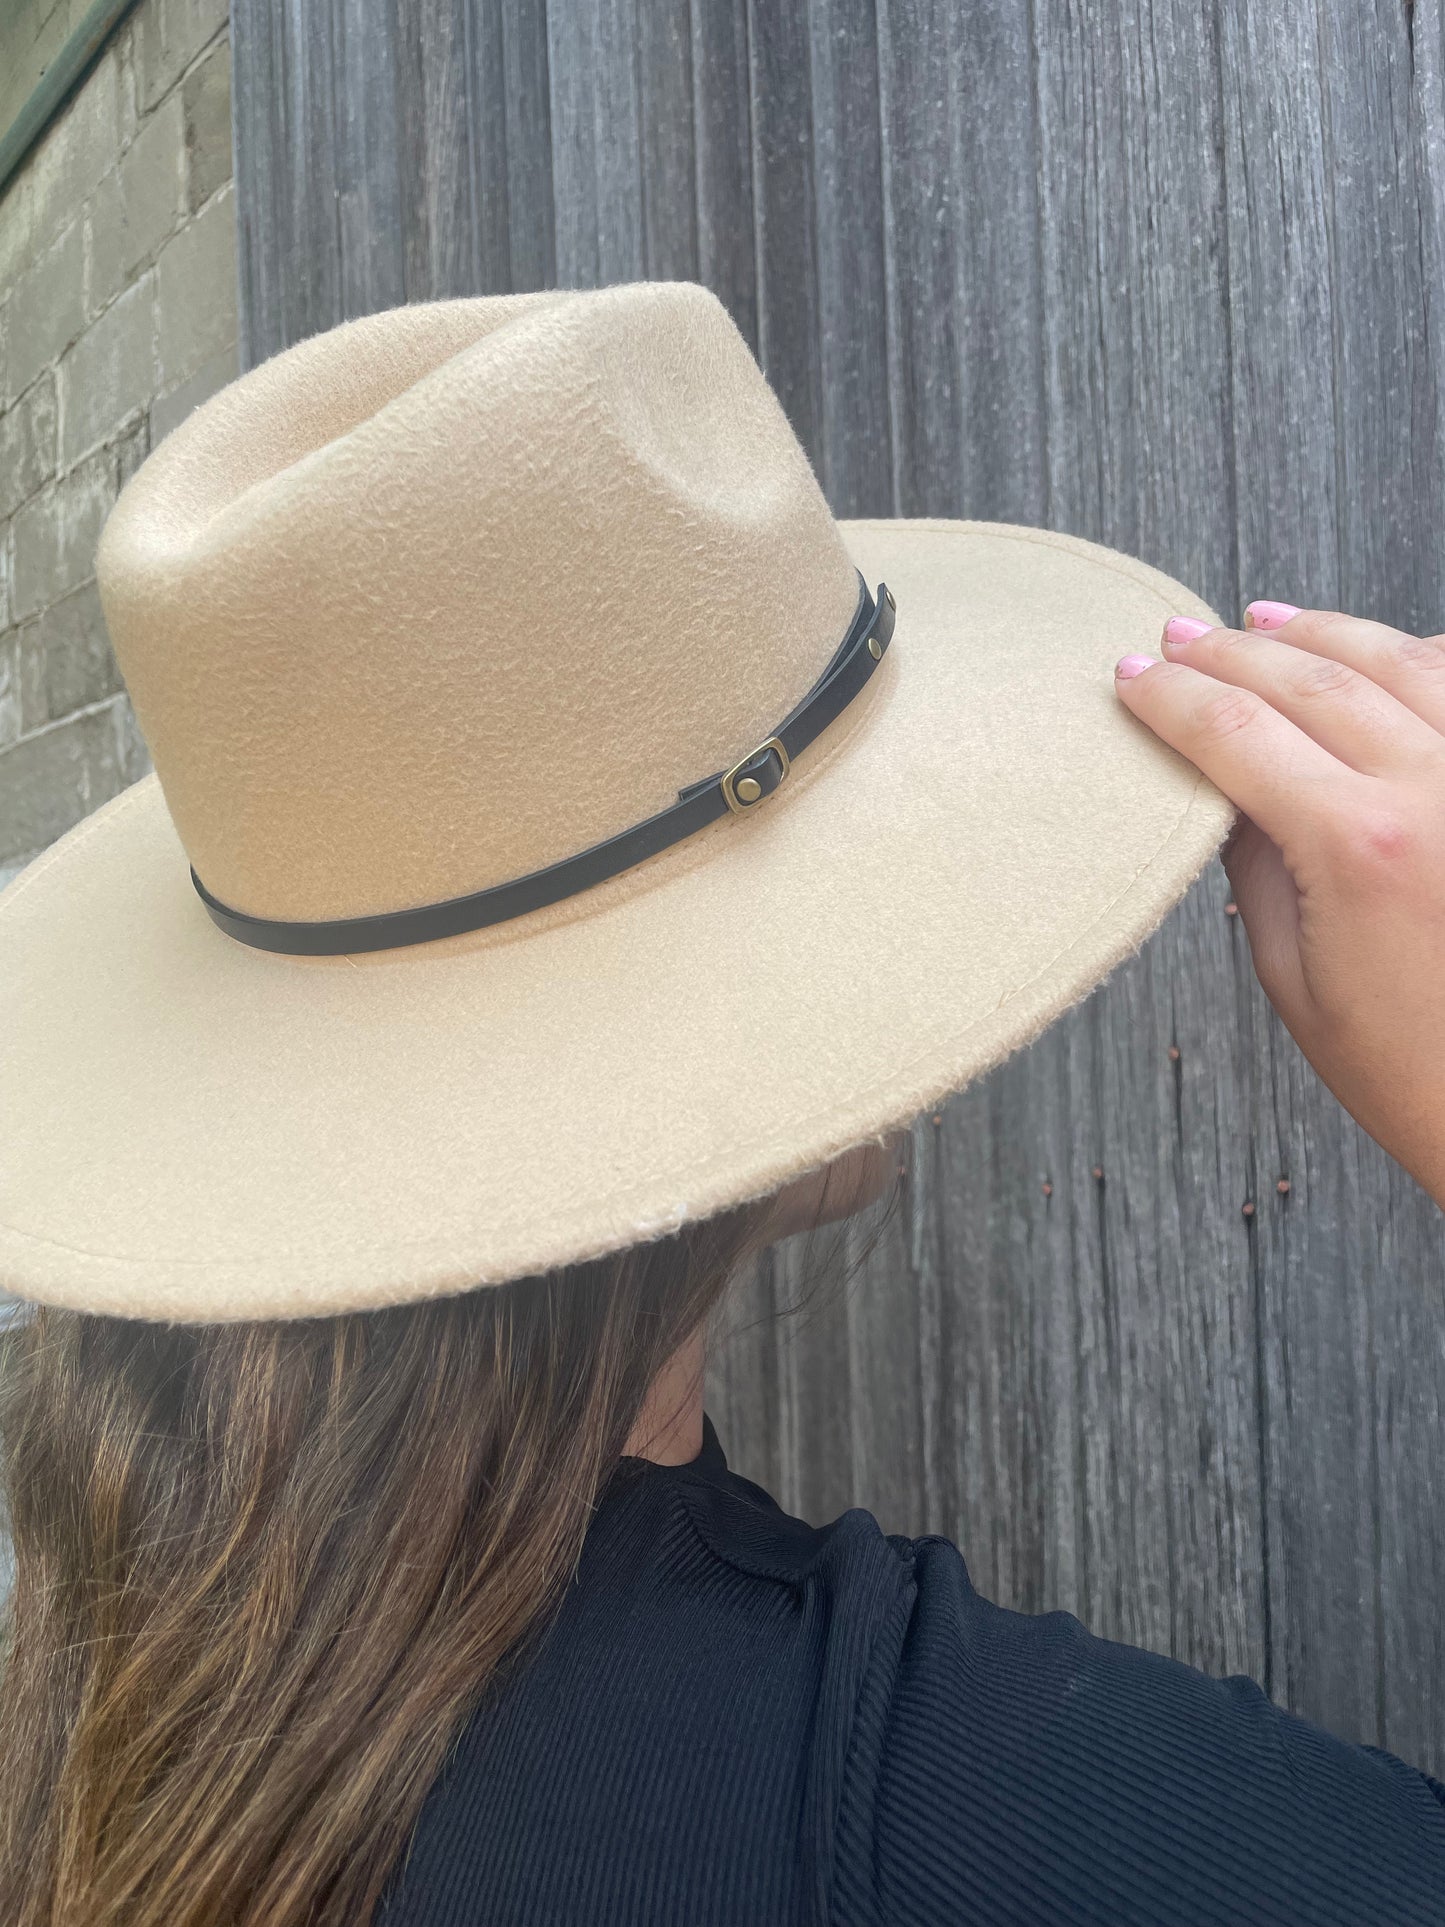 UNISEX BROWN FEDORA HAT WITH BELT BUCKLED AND STUD DECORATION